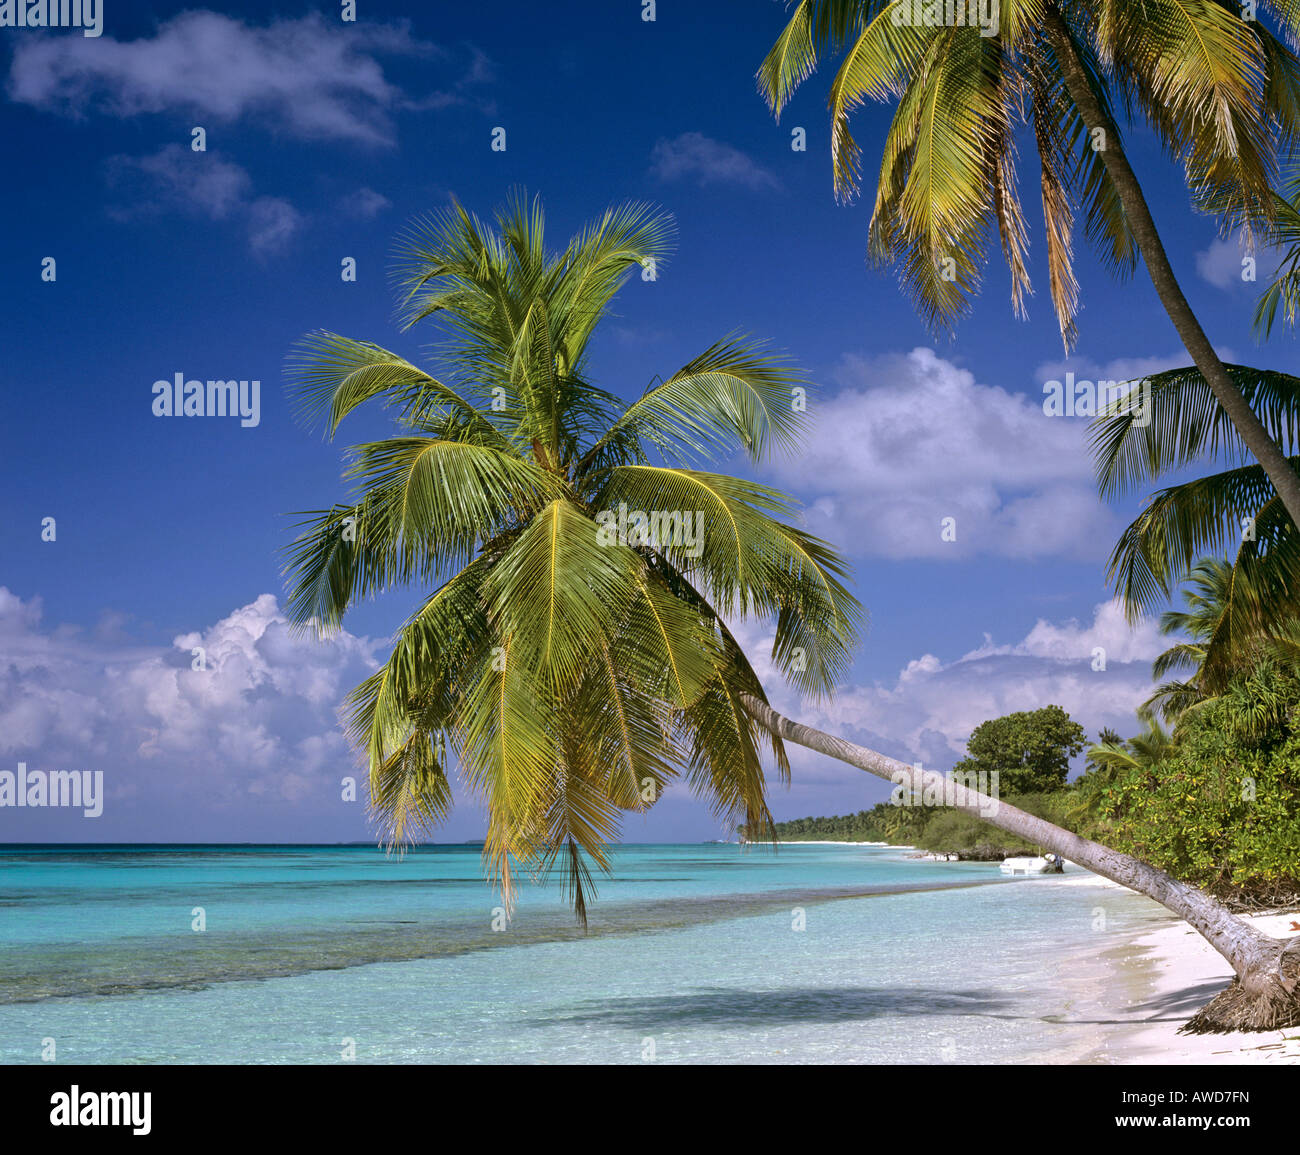 Palm tree on beach hanging over water, Maldives, Indian Ocean Stock Photo